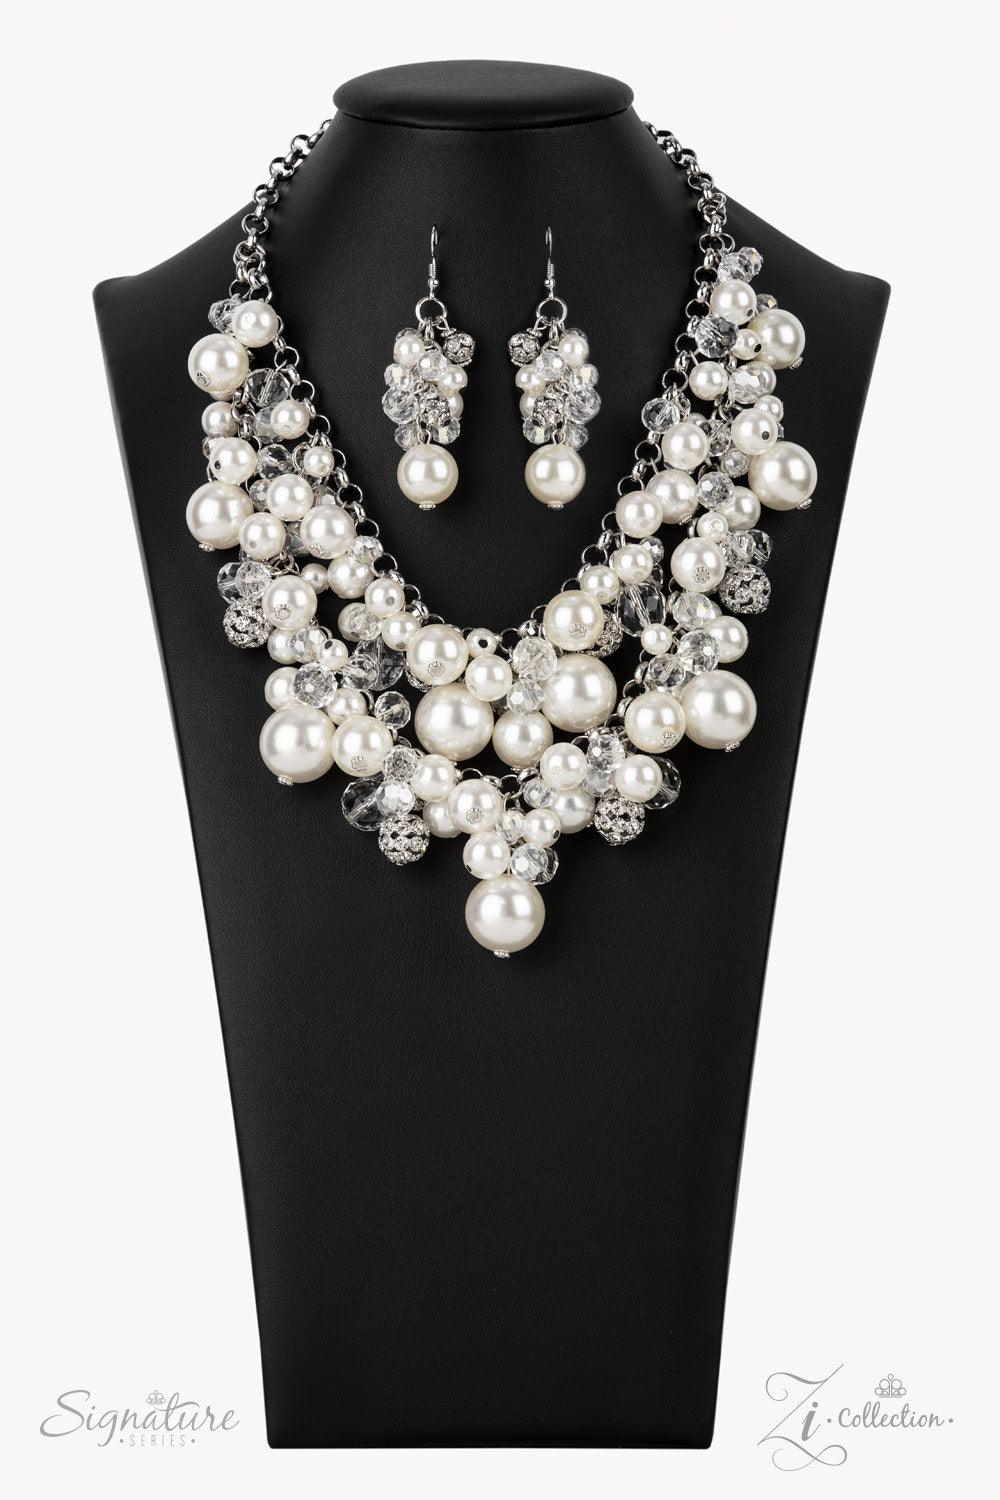 Paparazzi Accessories The Janie An elegantly effervescent collection of oversized pearls, glassy crystal-like beads, and white rhinestone studded silver ornaments effortlessly clusters along two bold silver chains below the collar. The bubbly bunched acce